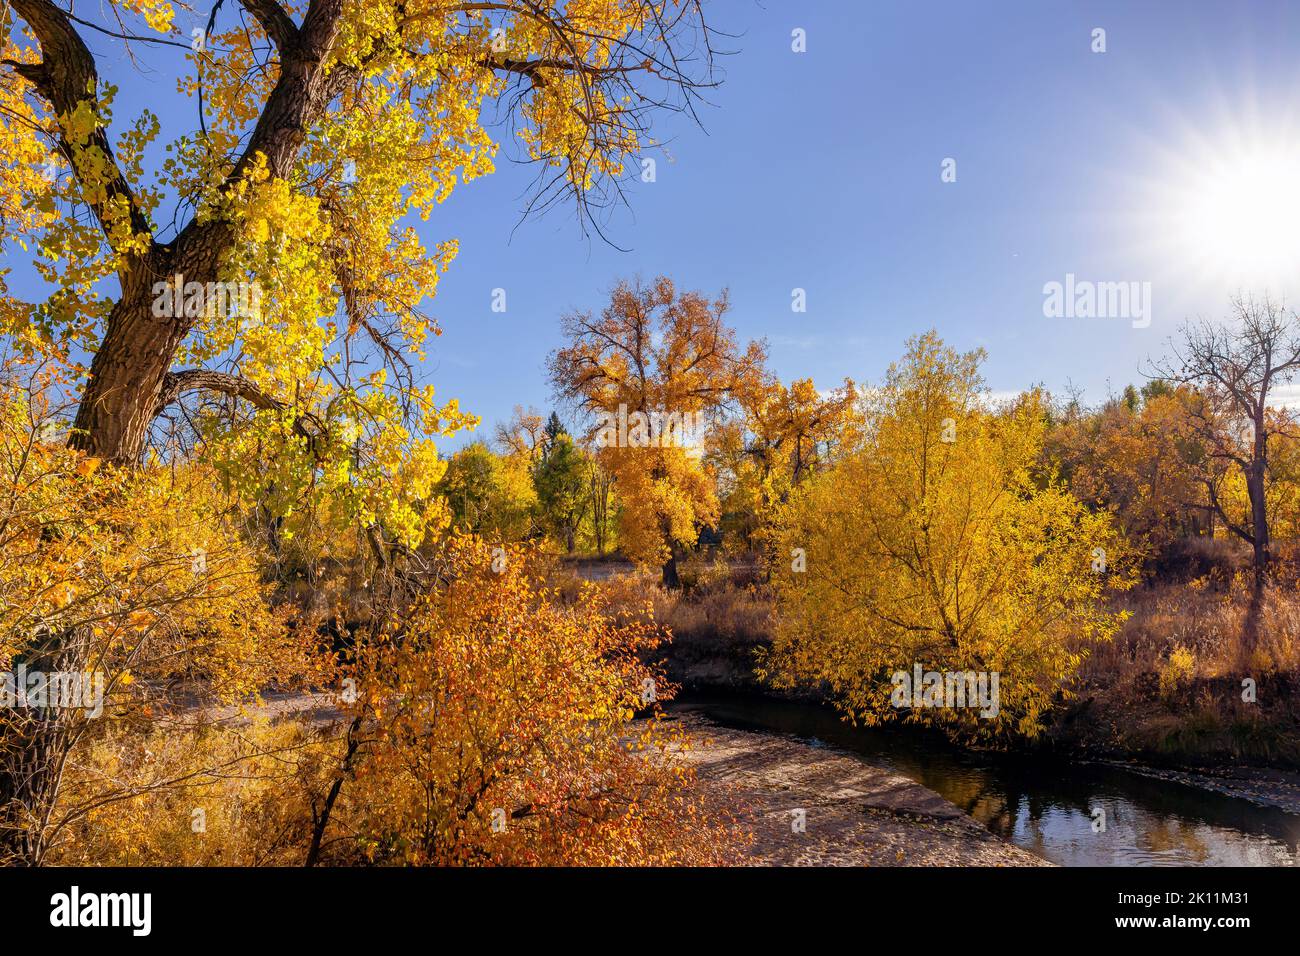 A scenic view of a small creek winding through the Landscape on a pretty Fall day in Colorado. Stock Photo